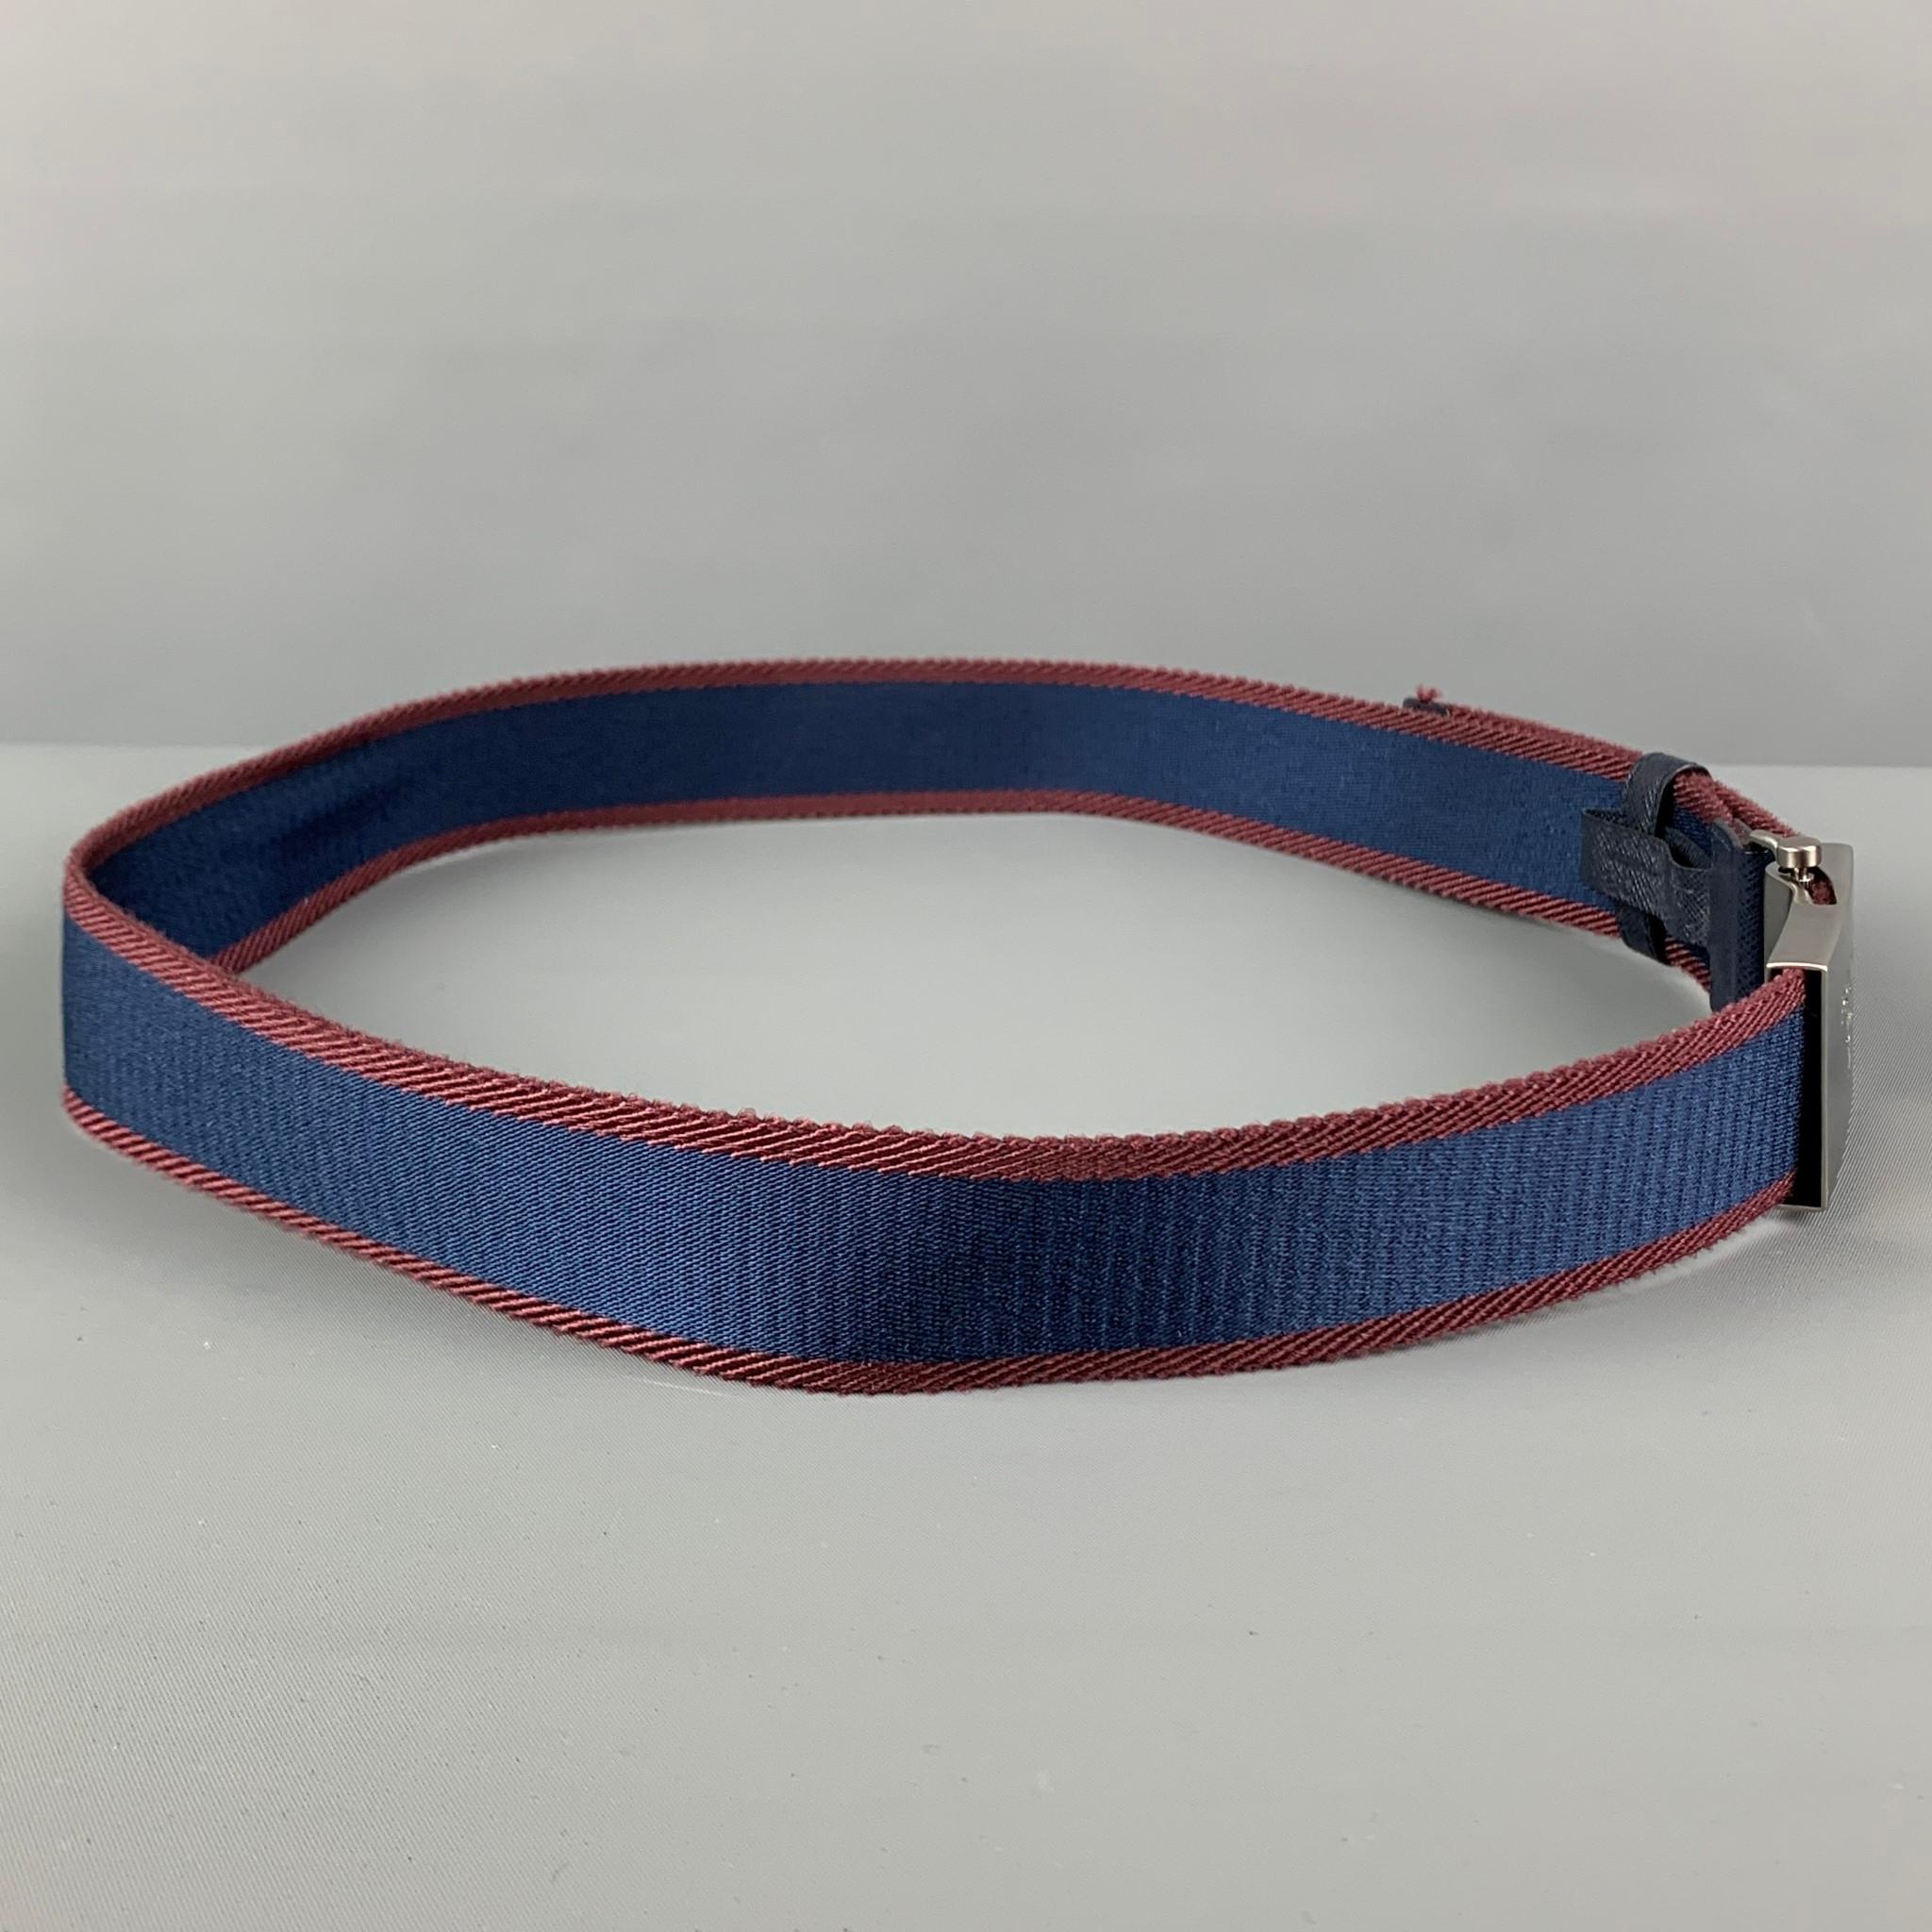 PRADA belt comes in a navy & burgund stripe ribbon material featuring a silver tone buckle closure. 

Very Good Pre-Owned Condition.
Marked: 90/36

Length: 42 in.
Width: 1.5 in.
Buckle: 2.25 in. 